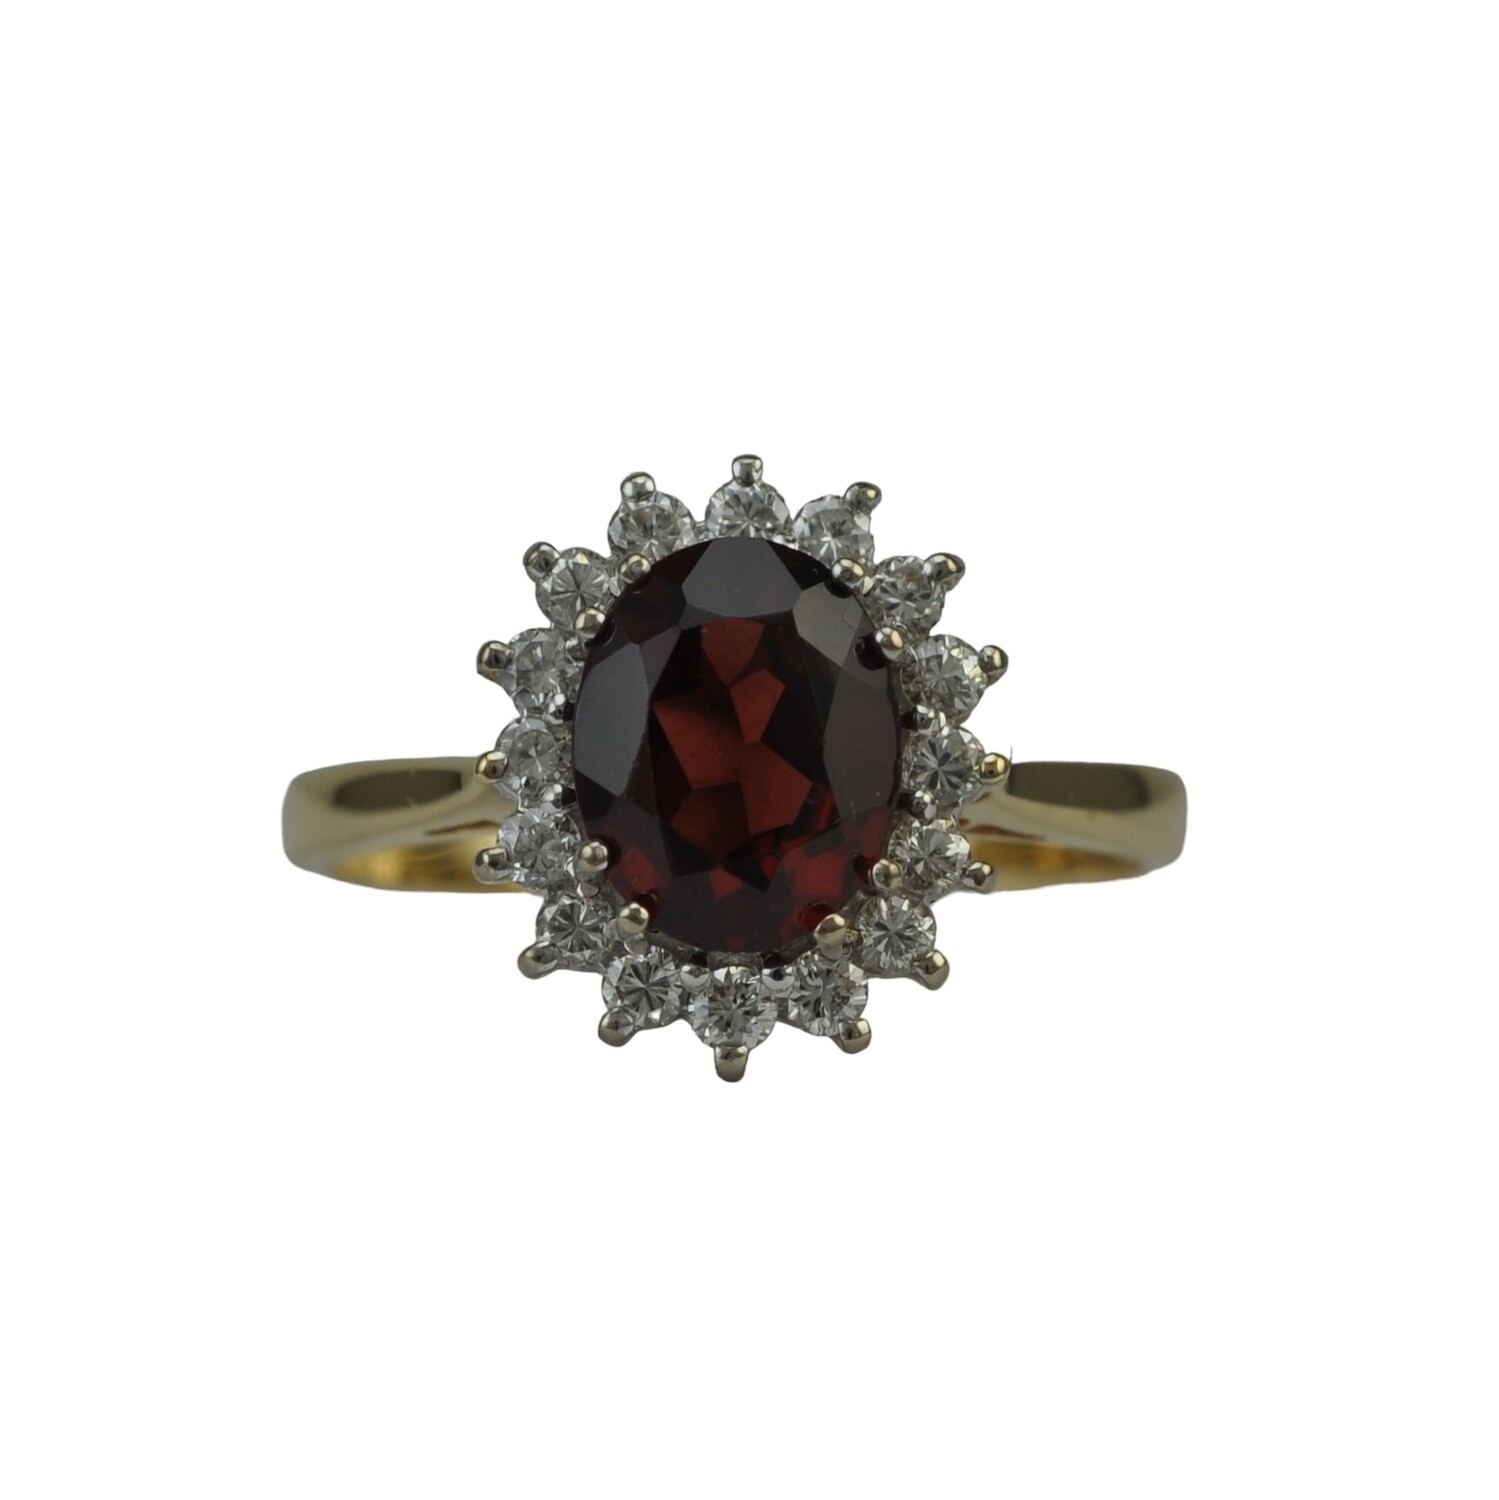 Preowned Garnet and diamond Cluster Ring